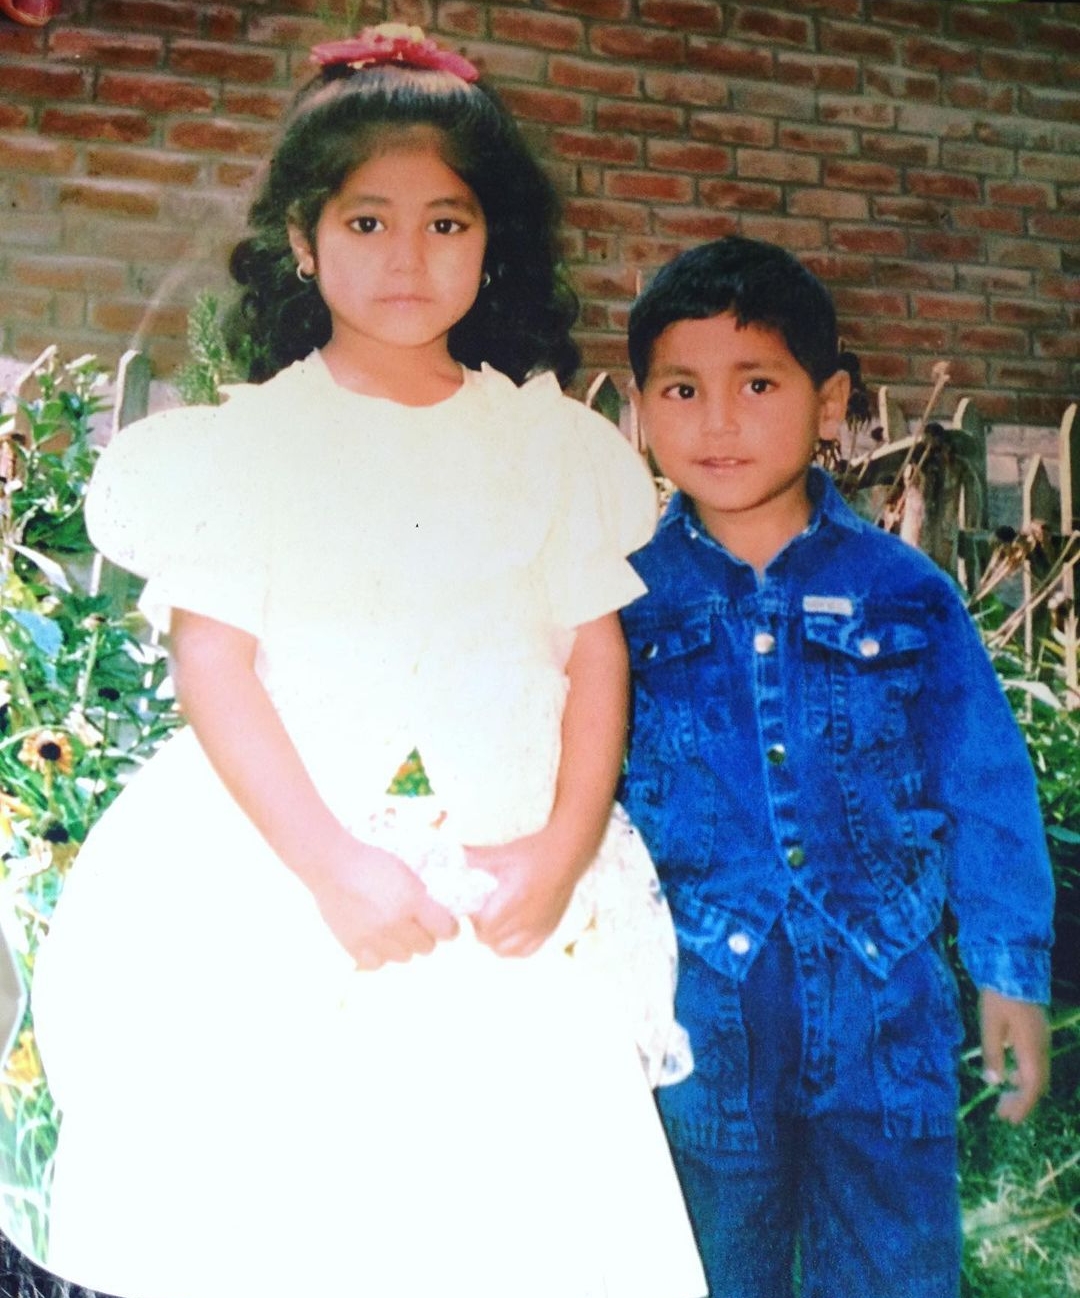 Television (TV) Actress Hina Khan Childhood Pic with Younger Brother Aamir Khan | Television (TV) Actress Hina Khan Childhood Photos | Real-Life Photos